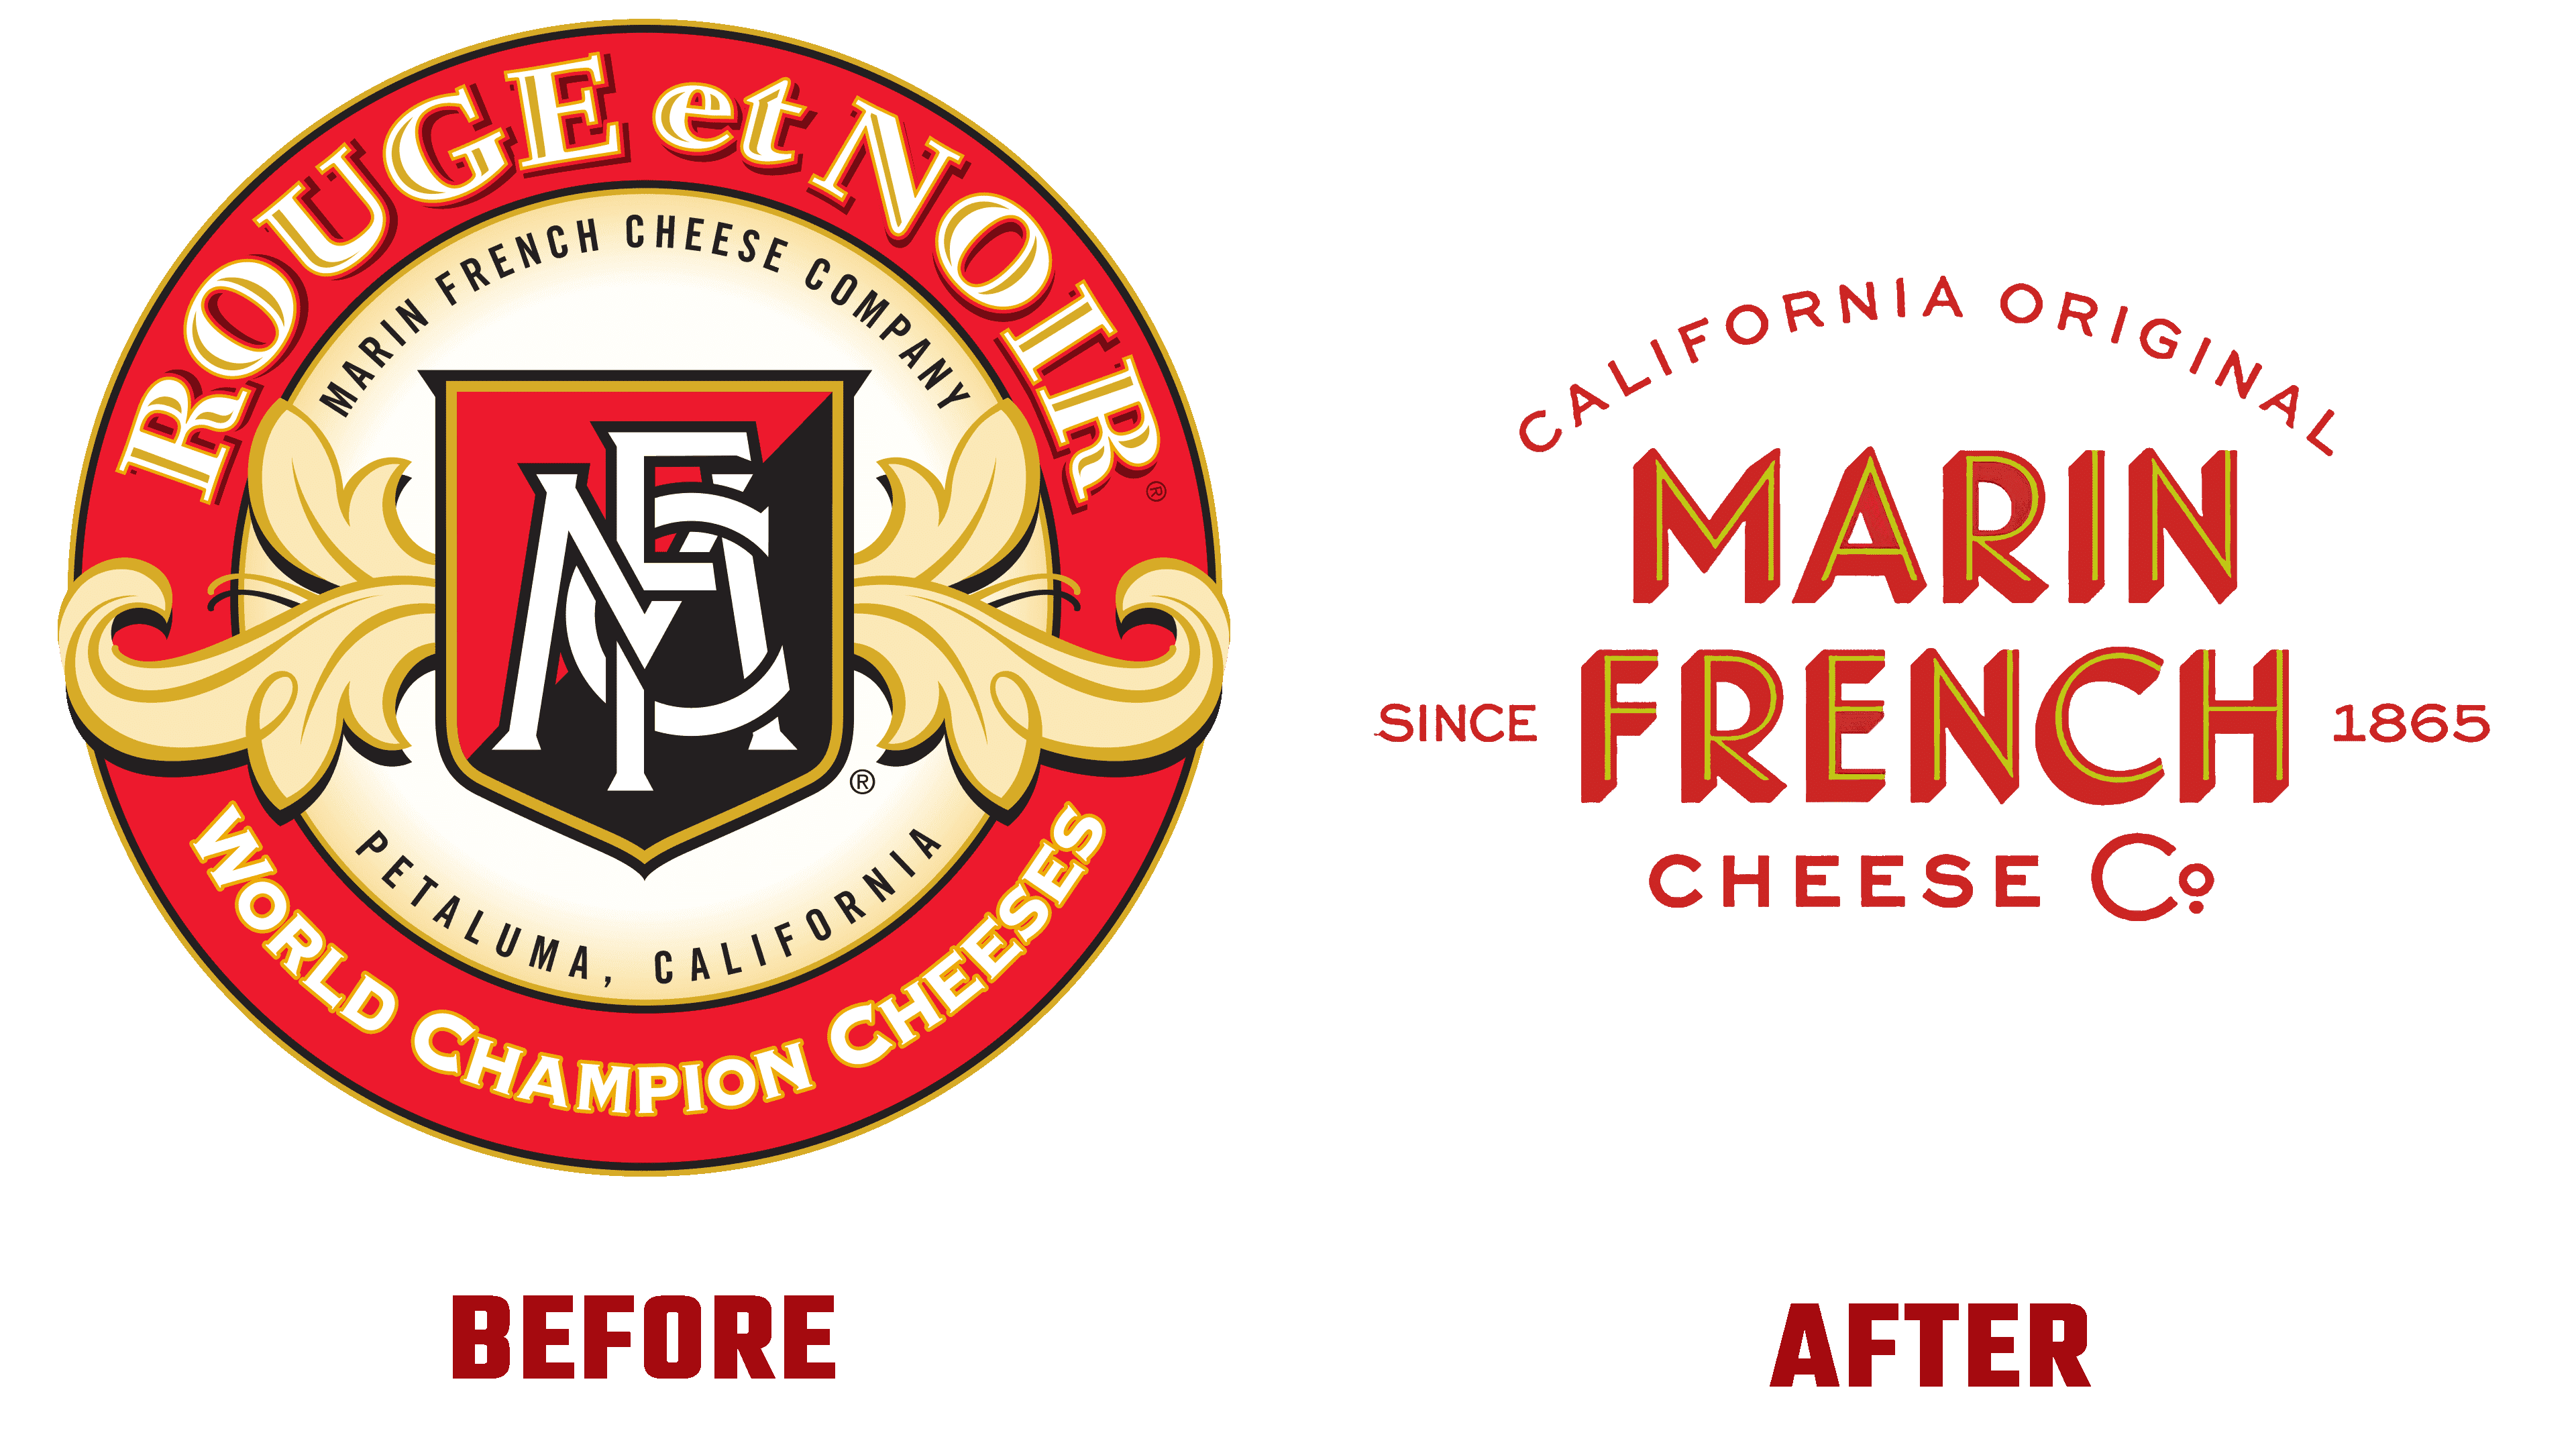 Marin French Cheese Co - updated design and effective marketing